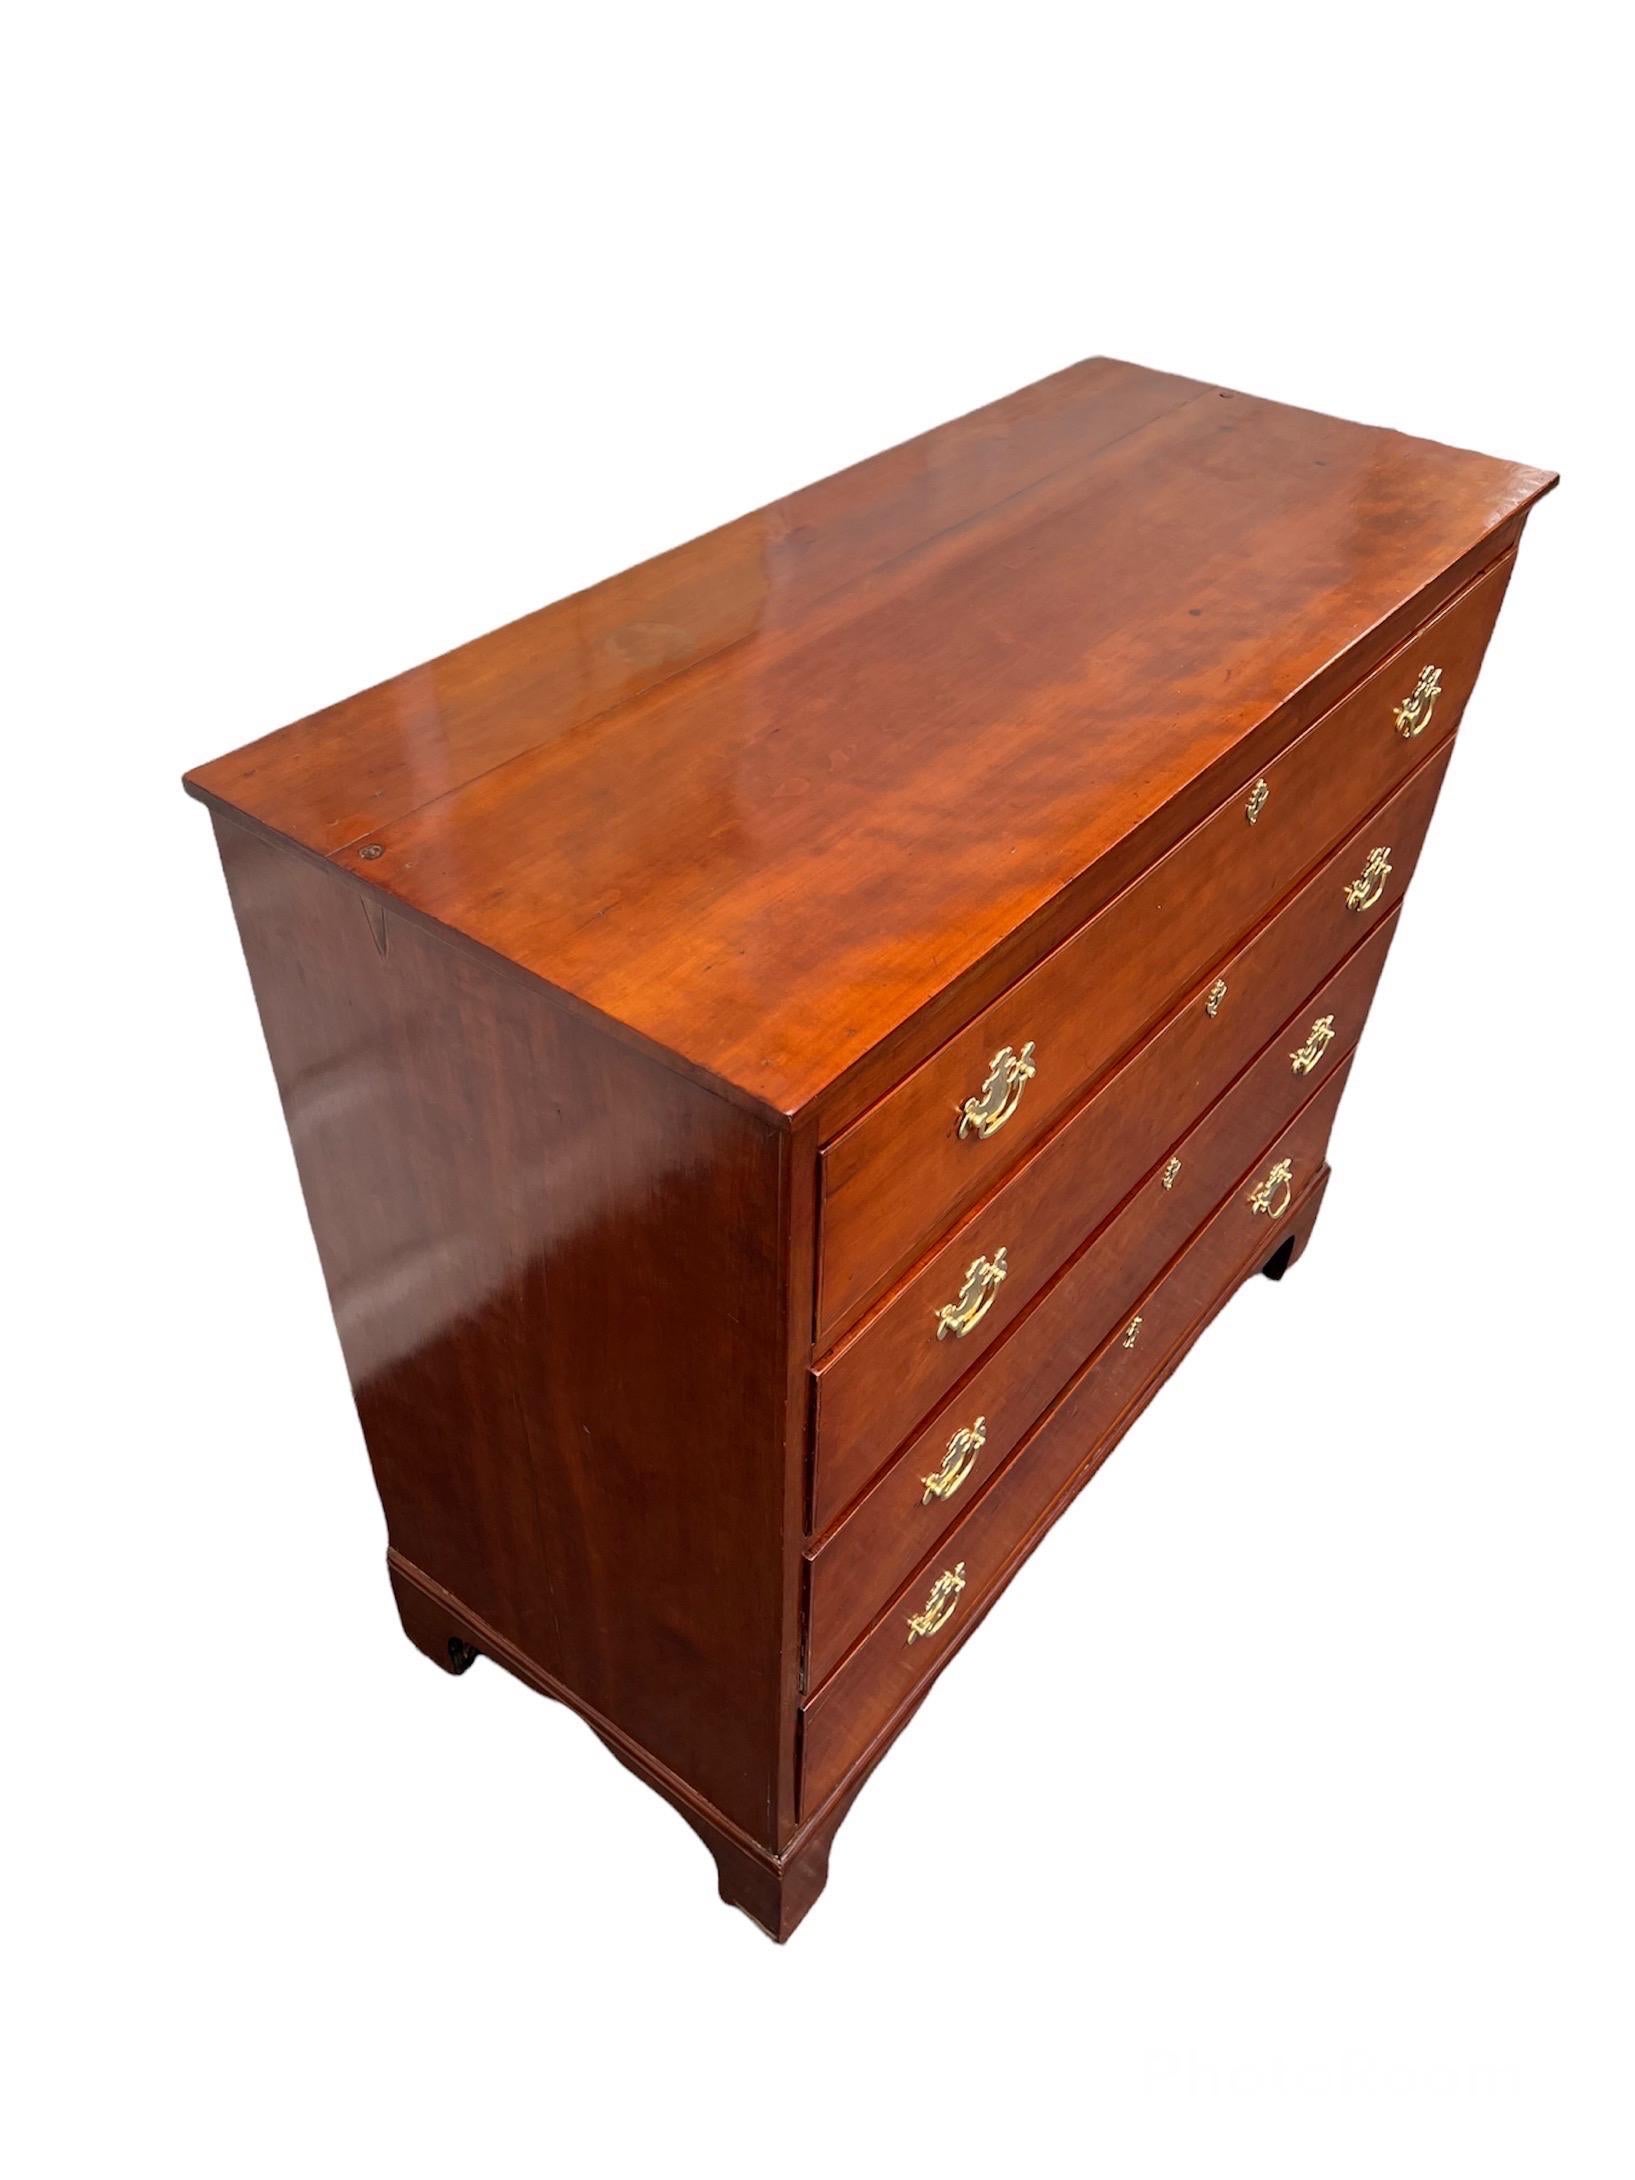 19th Century American Cherry Wood Chest of Drawers 